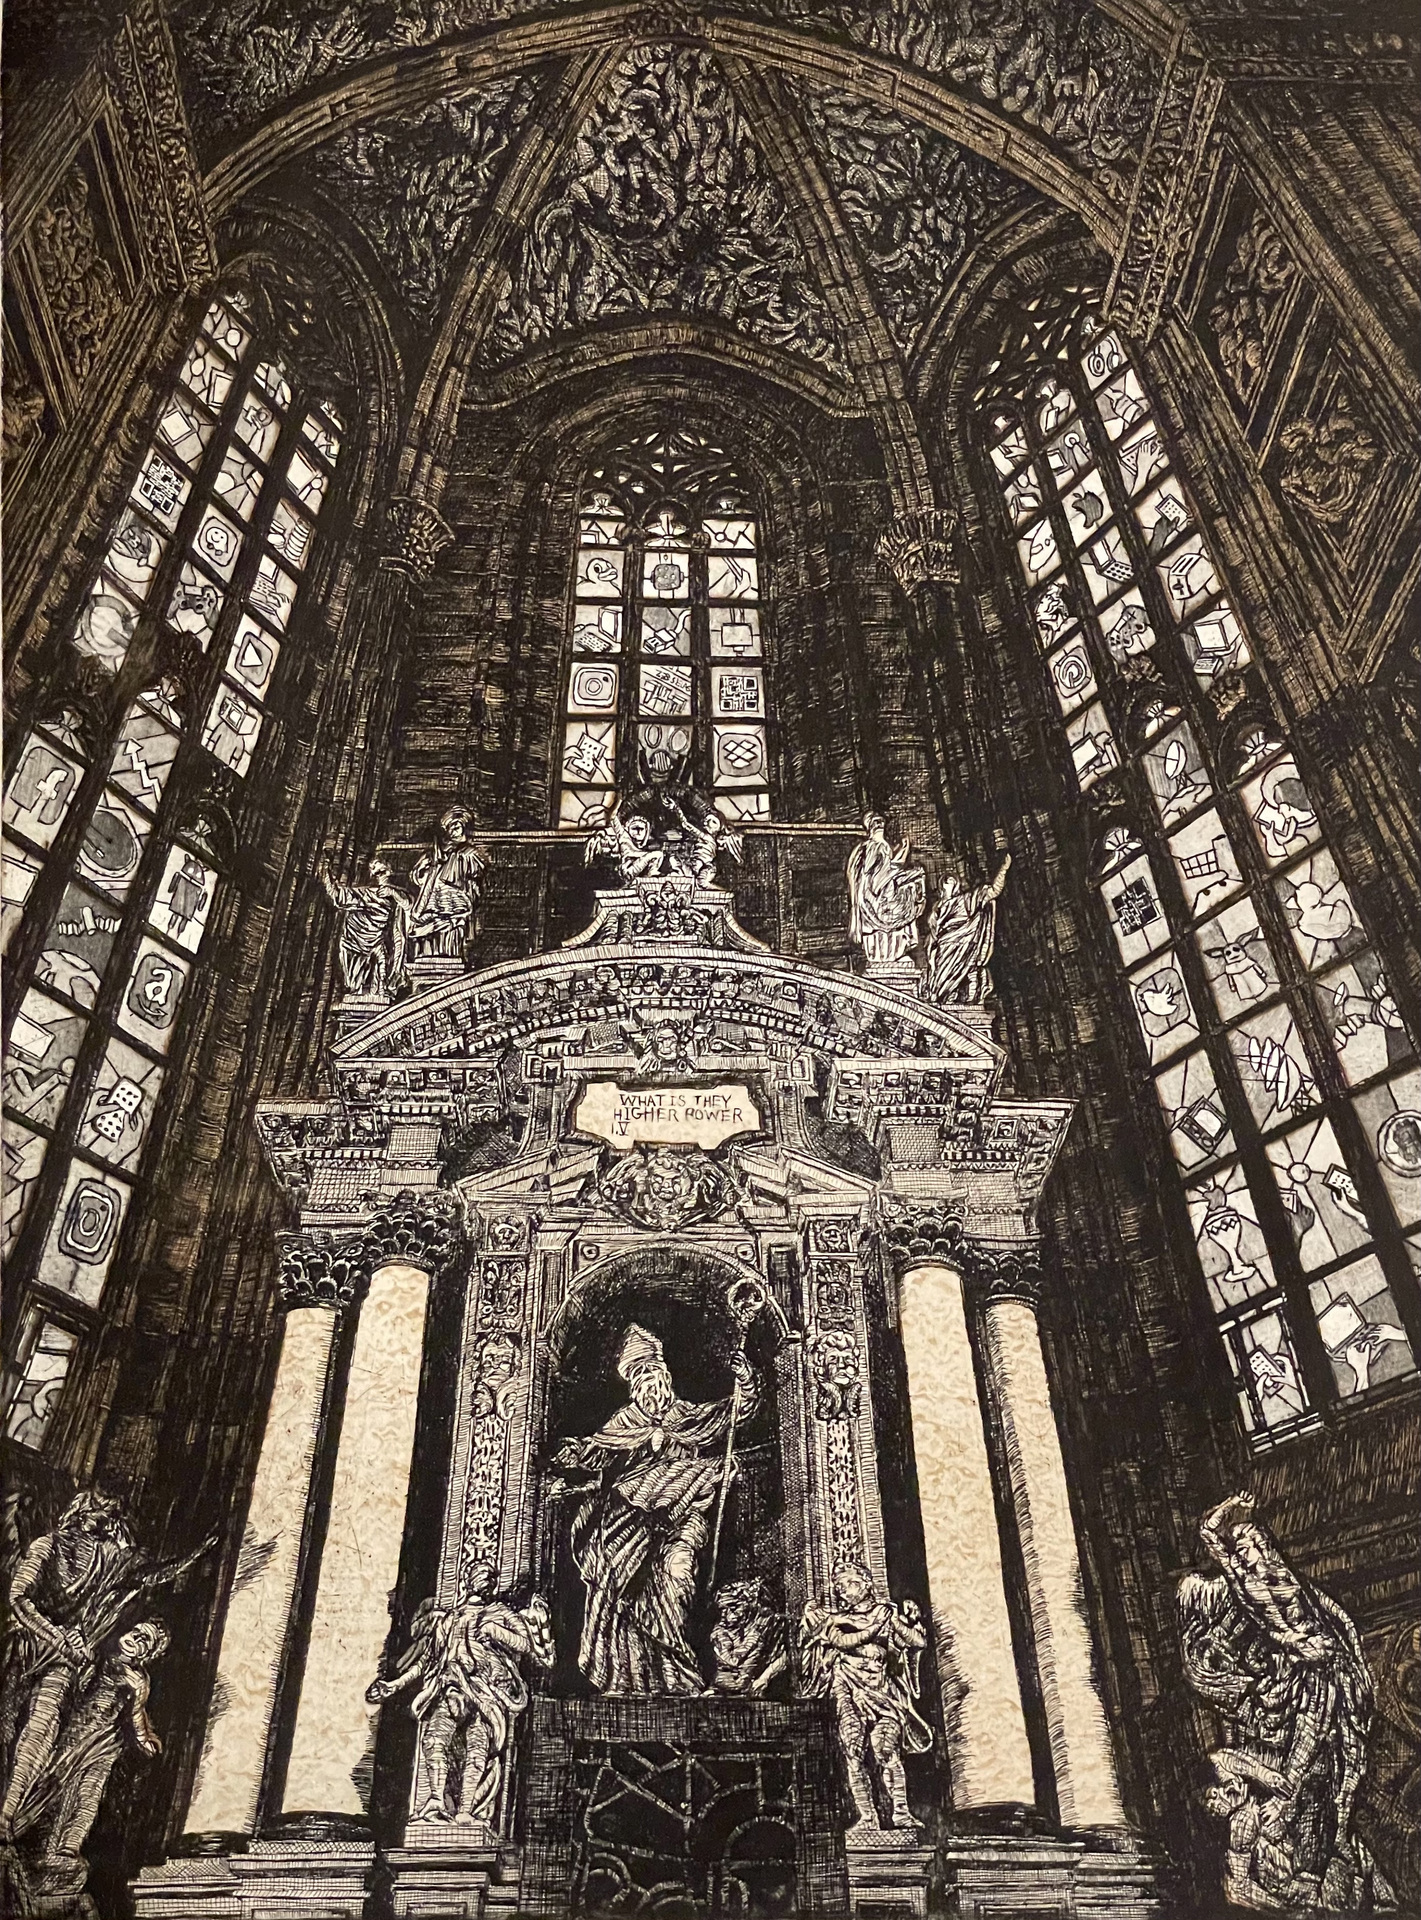 Andrew Lawson etching of Cathedral of Milan with modern consumer trends depicted in the stain glass windows